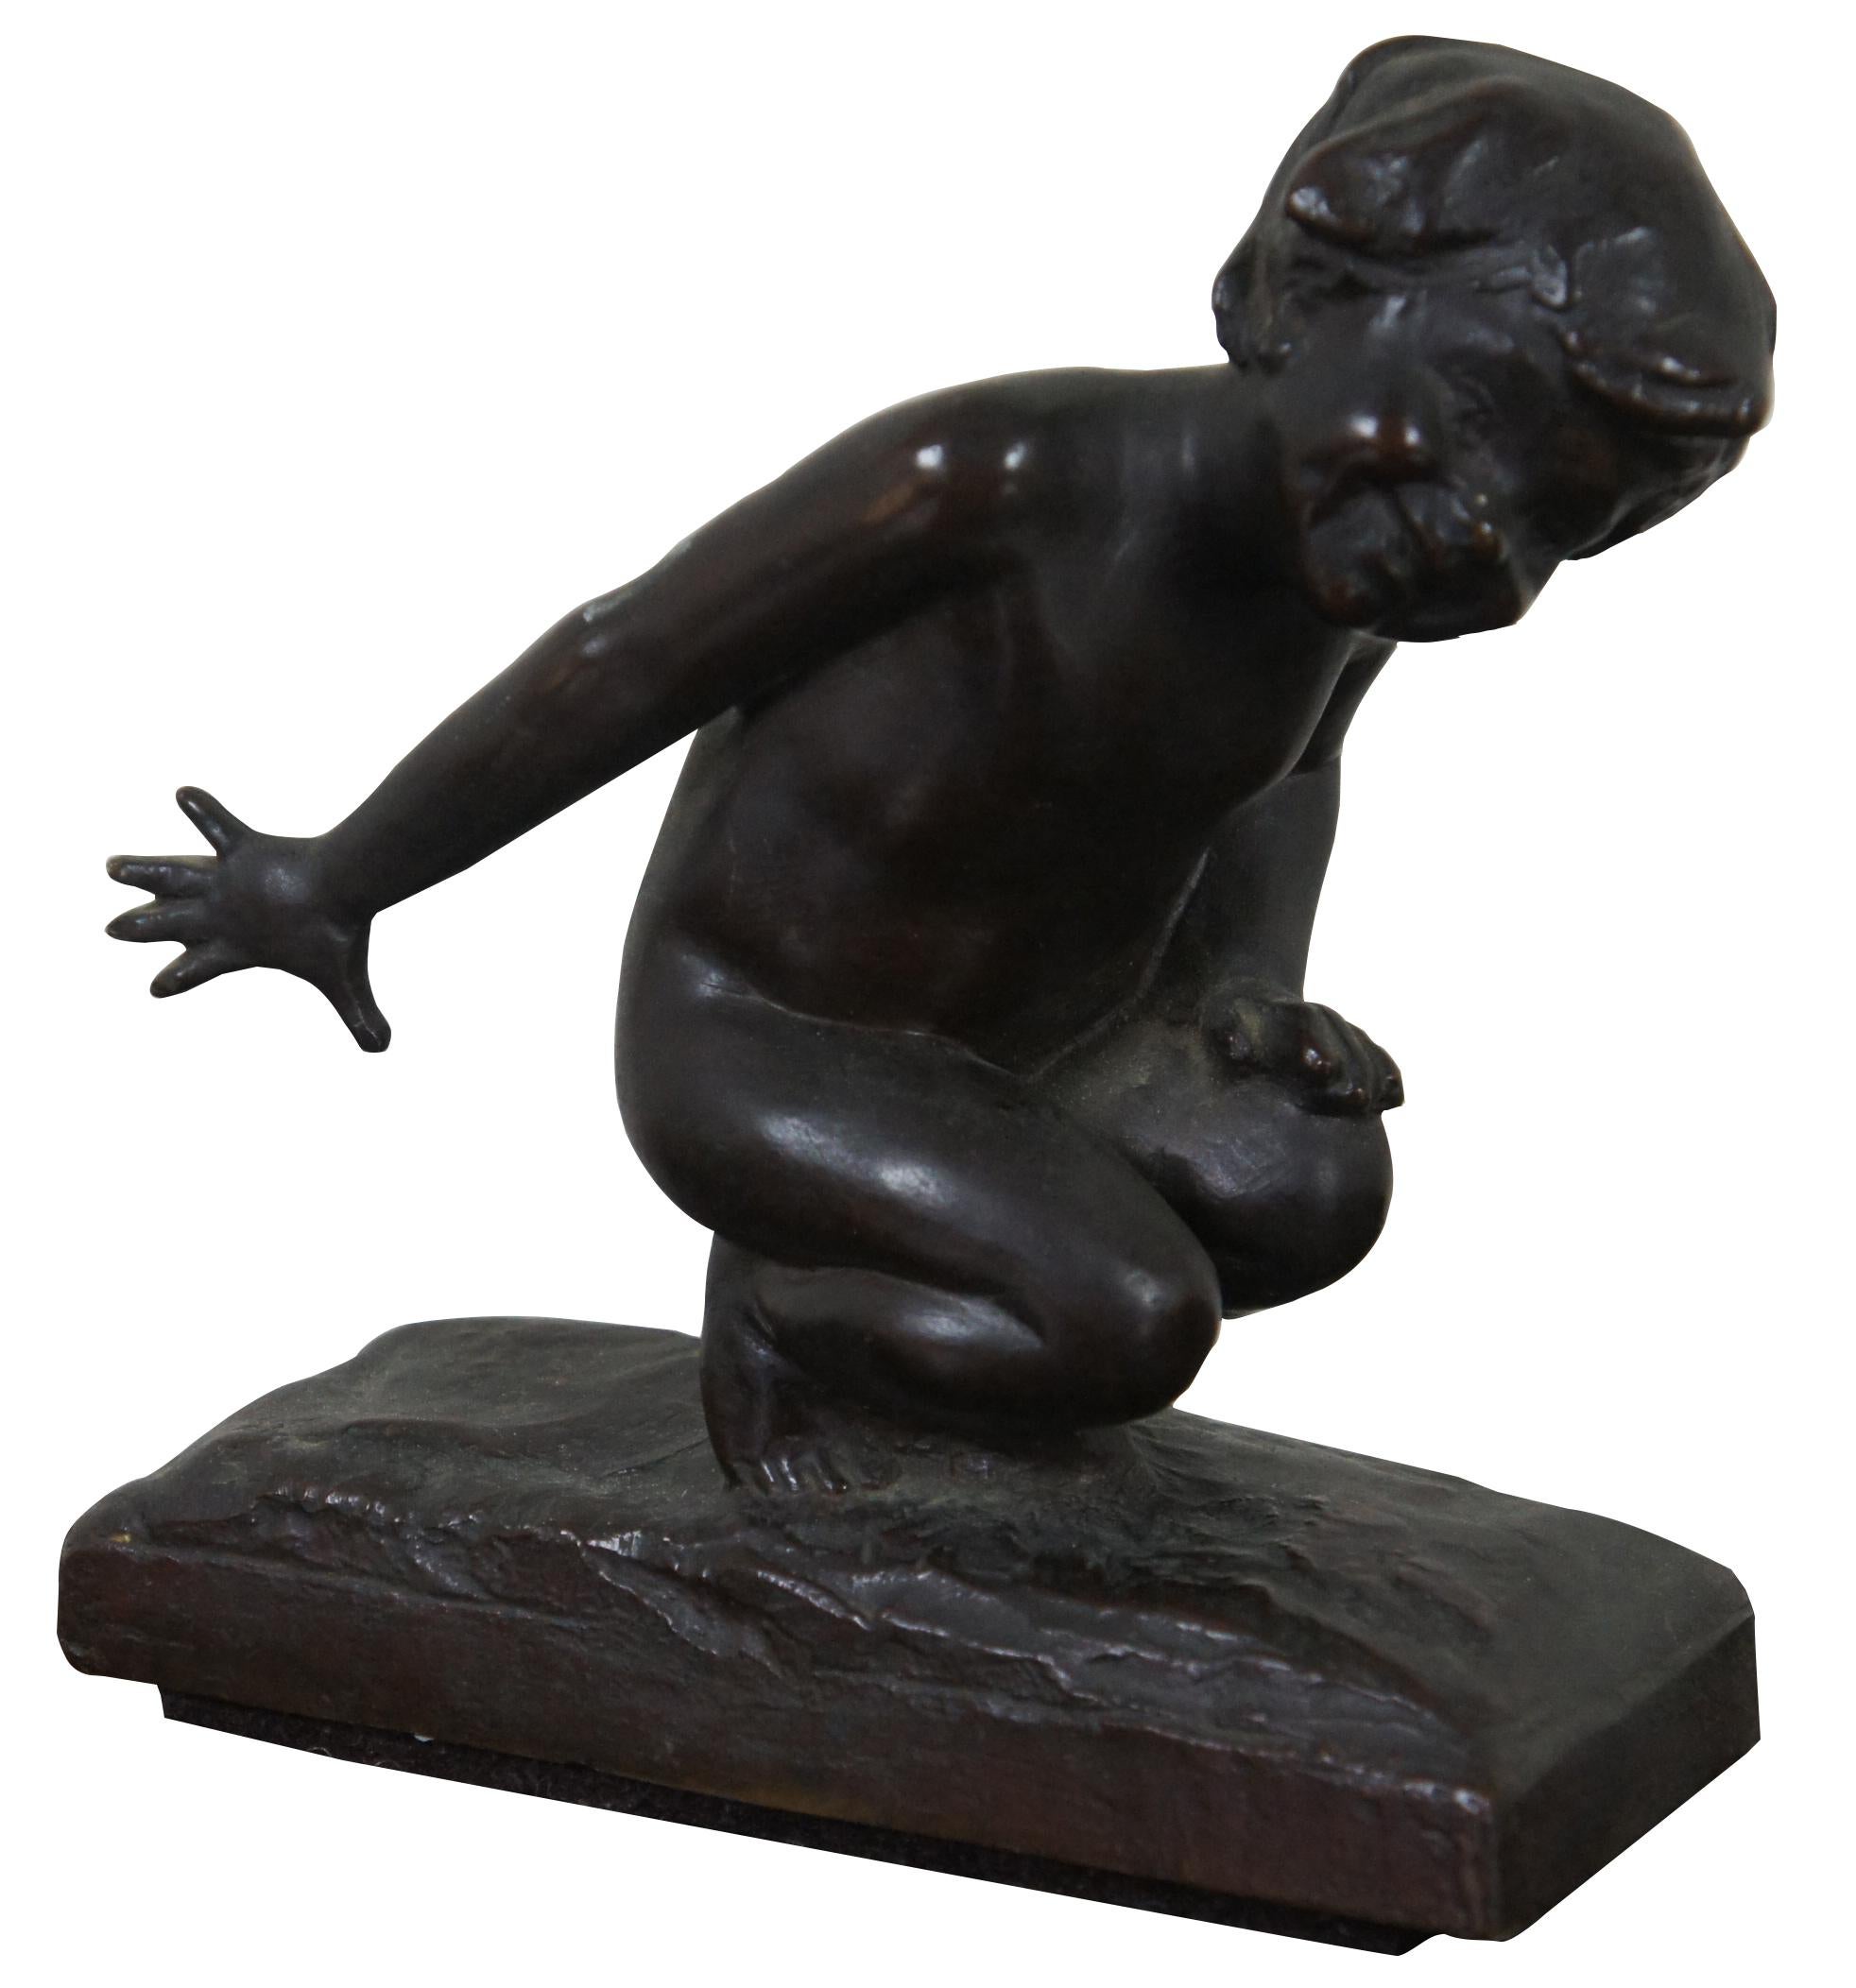 Two bronze bookends featuring two children playing by Edith Barretto Parsons, marked with copyright 1913, produced by the Gorham Co foundry. / BIO: Edith Barretto Stevens, grandmother of Serena Pelissier, was born in Halifax, Virginia, in 1878, as